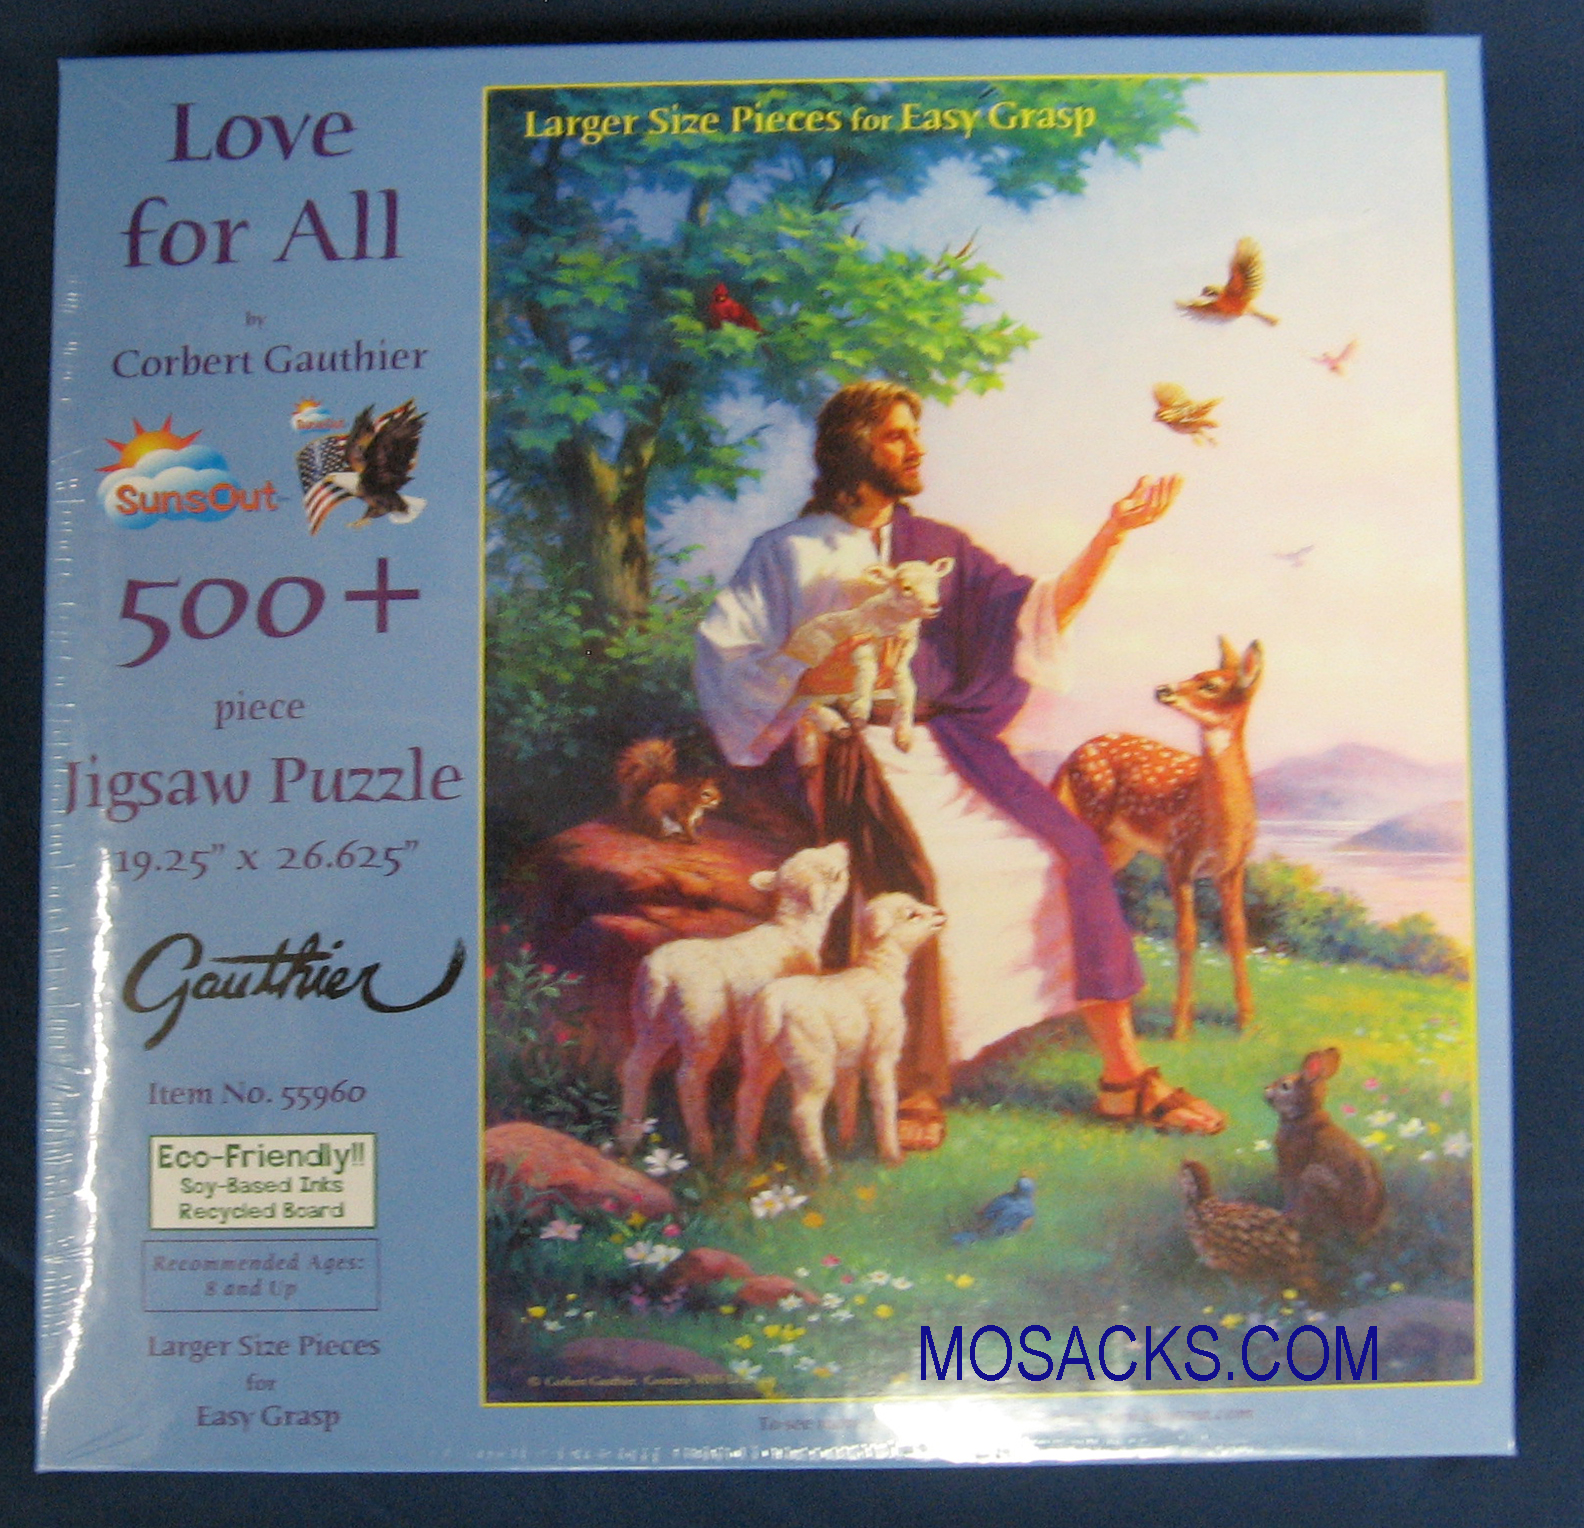 Love For All 500 piece Puzzle 19x26 Inch 55960